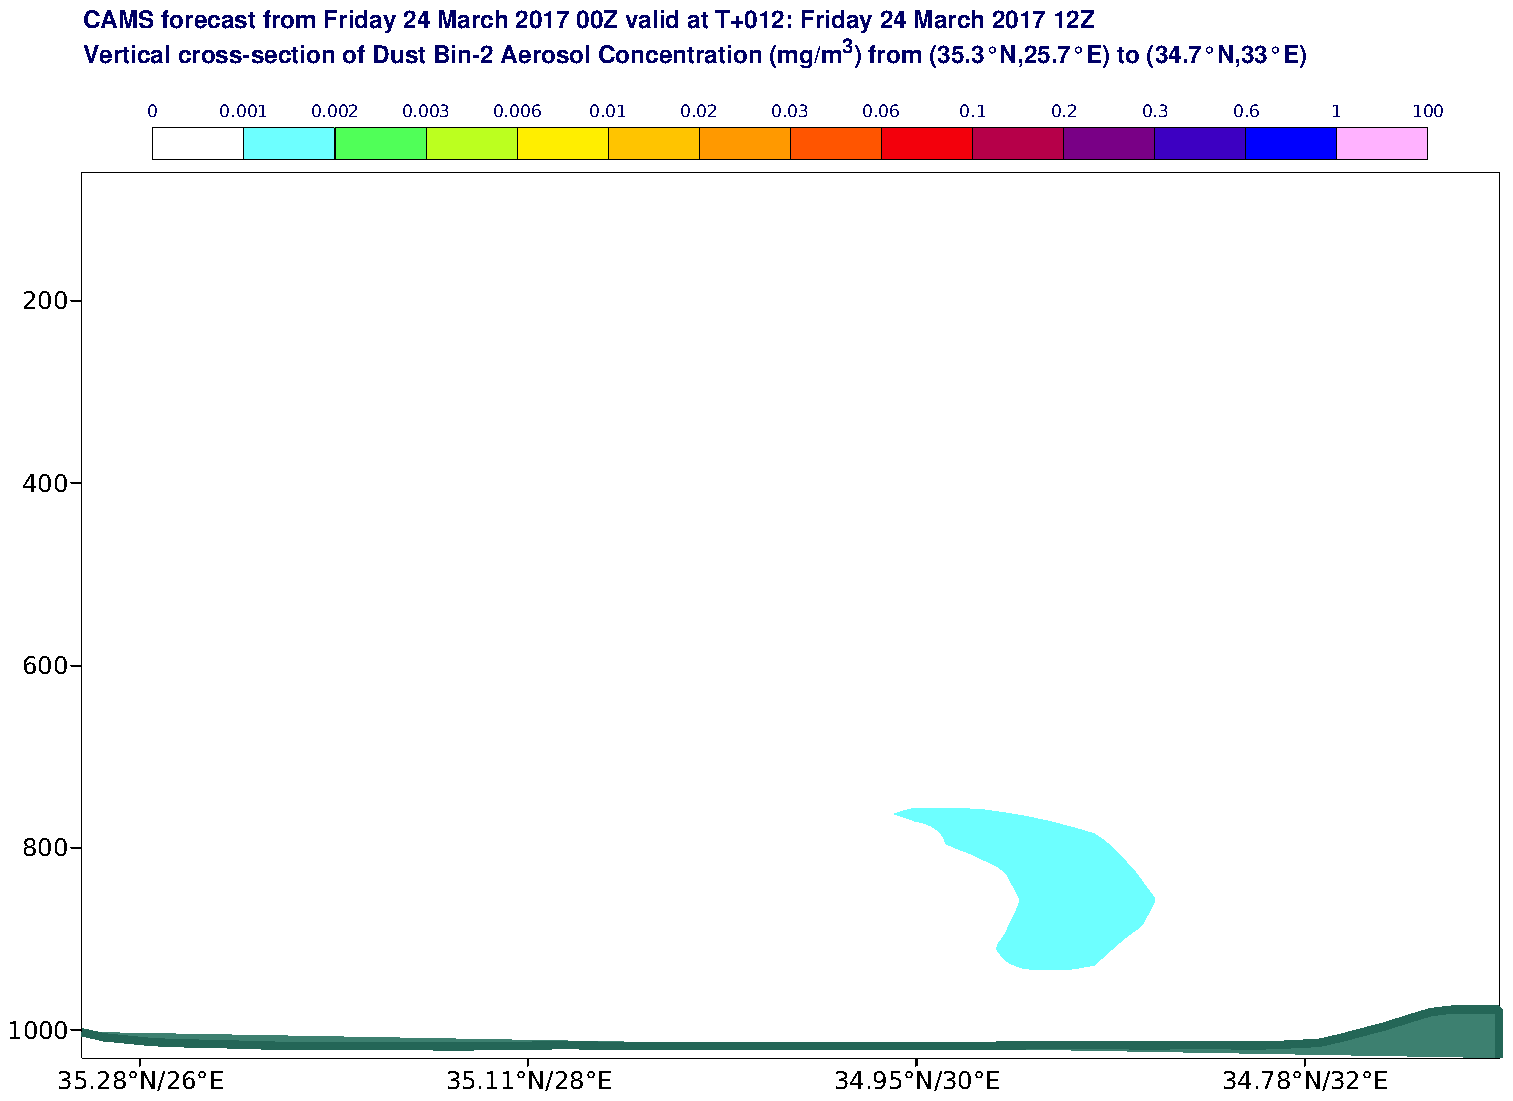 Vertical cross-section of Dust Bin-2 Aerosol Concentration (mg/m3) valid at T12 - 2017-03-24 12:00